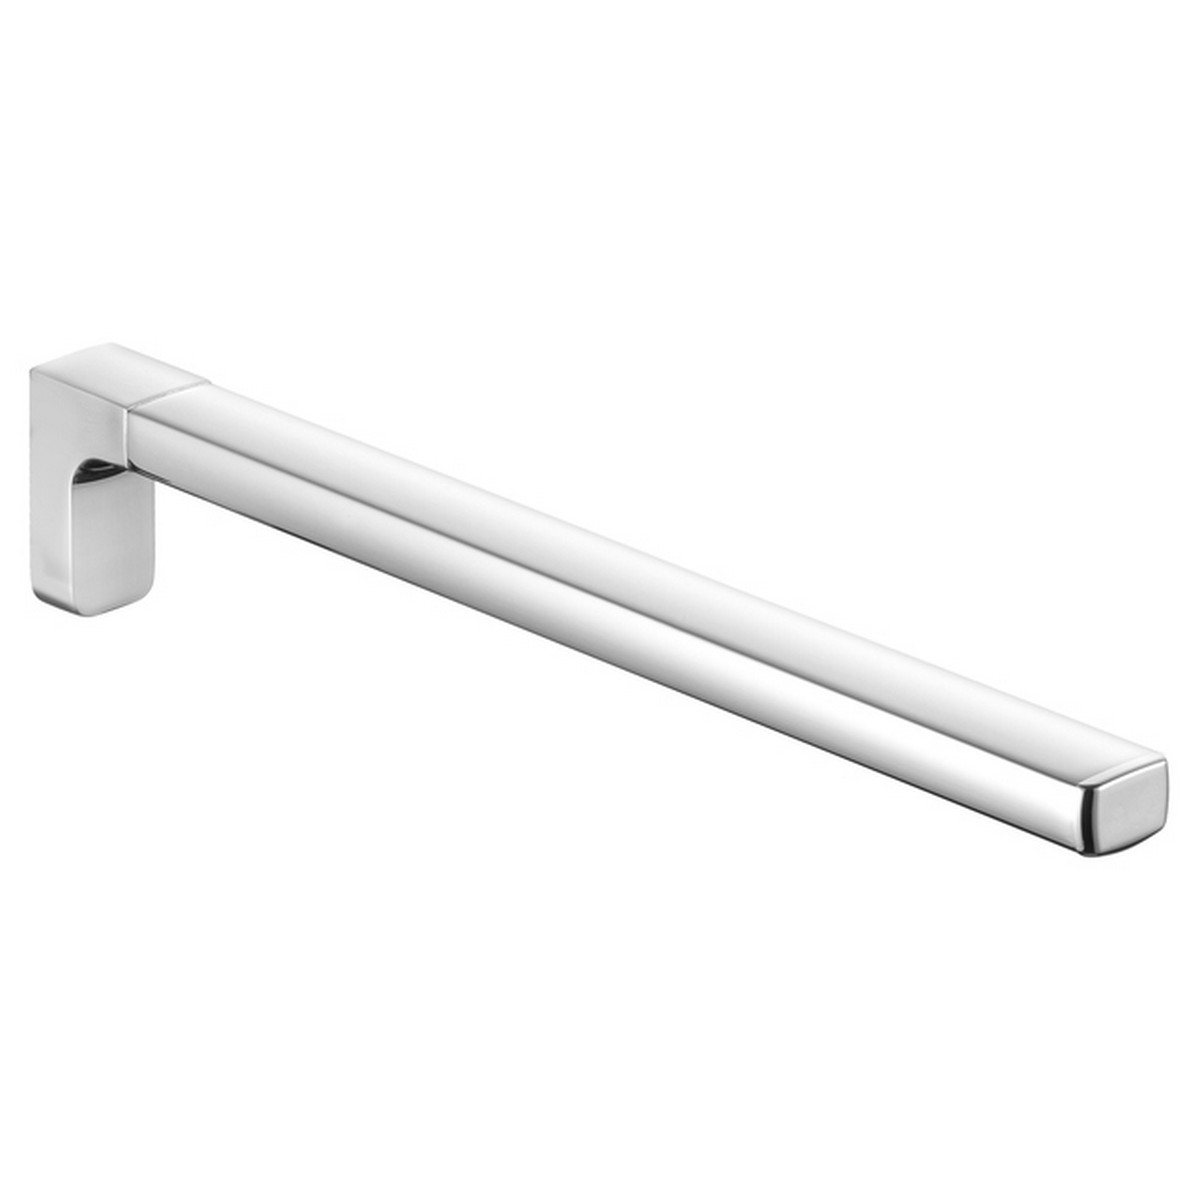 KEUCO 12722010000 MOLL 13 3/8 INCH WALL MOUNTED SINGLE TOWEL HOLDER IN POLISHED CHROME